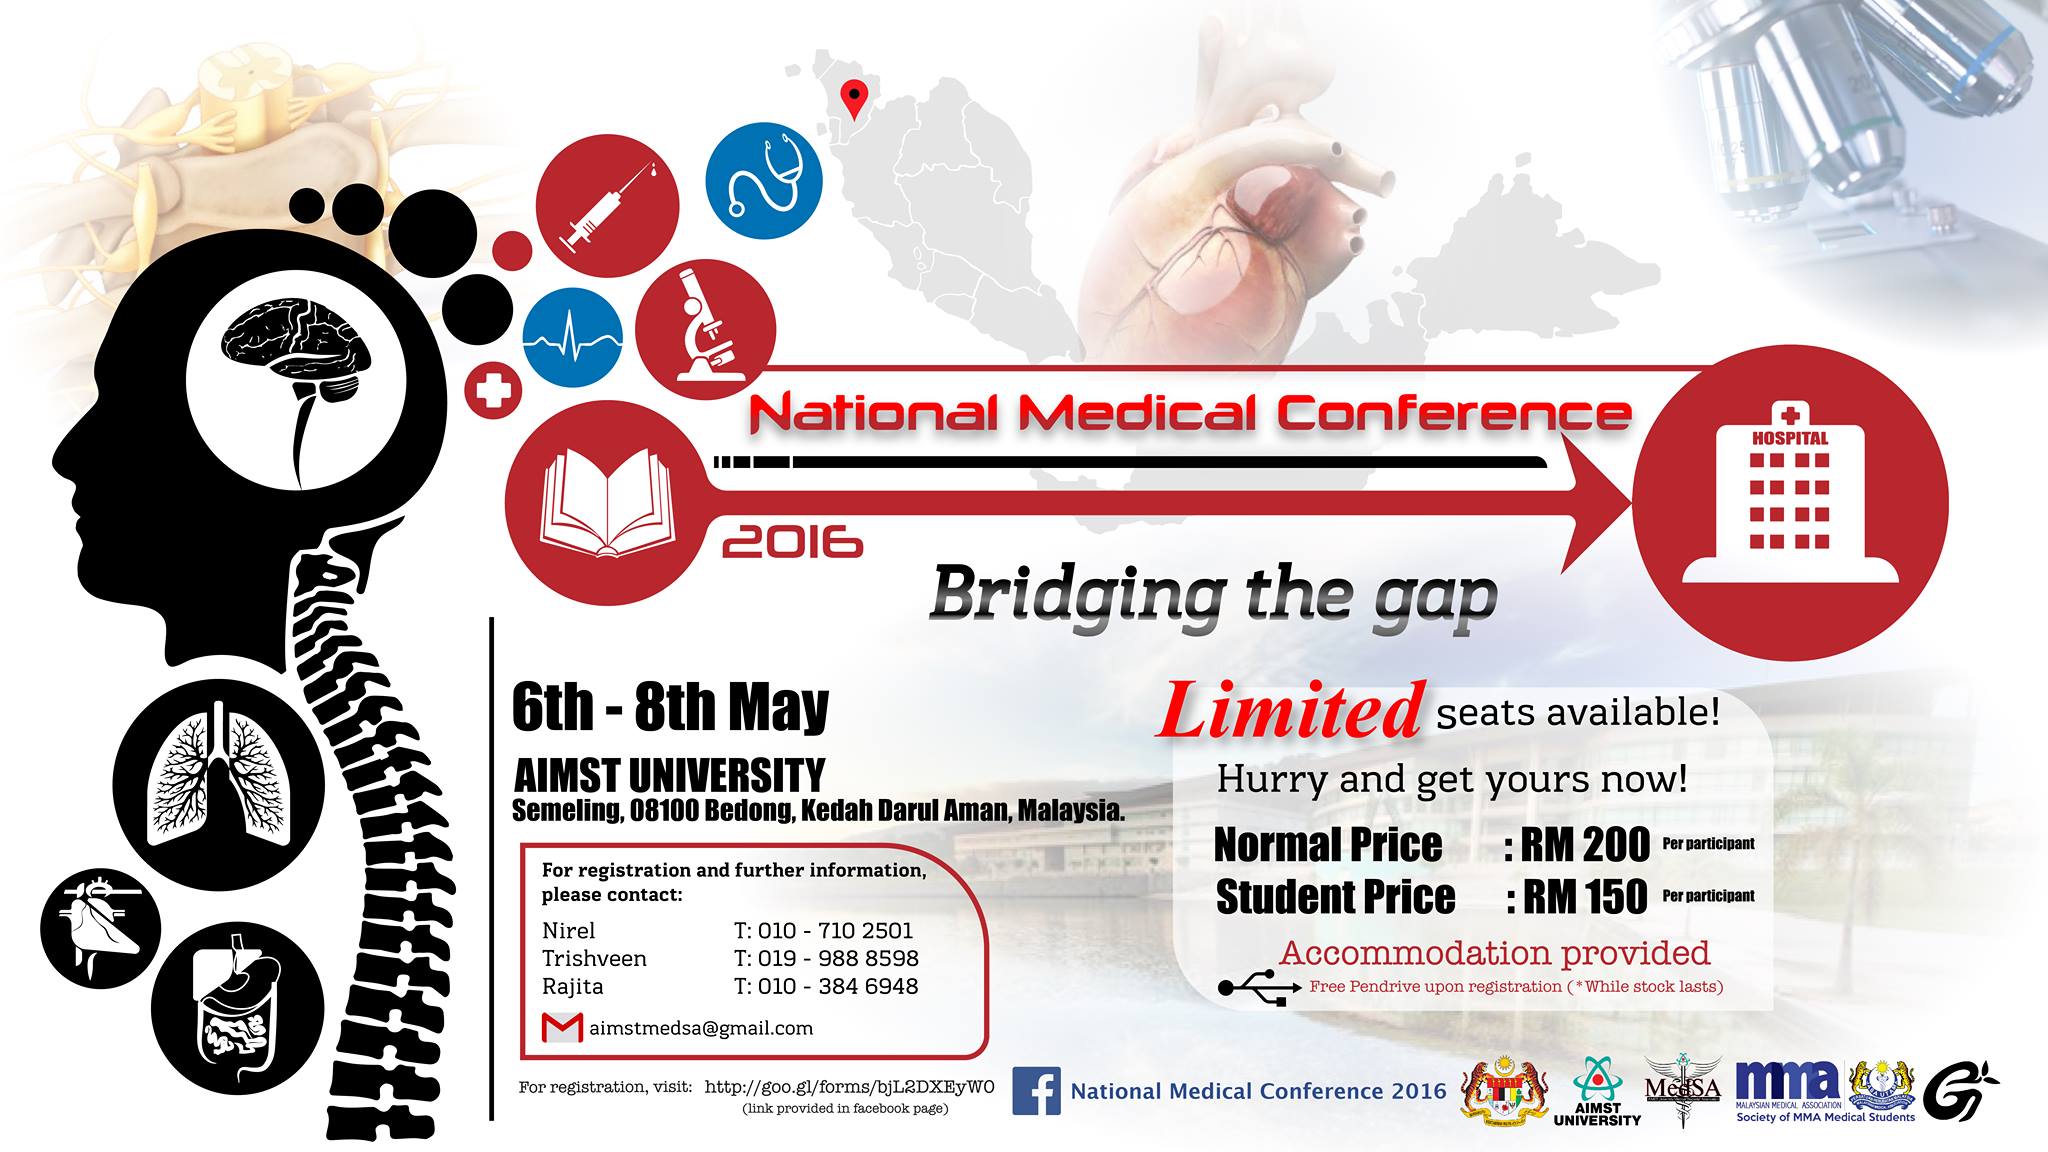 primary issues medical conferences 2016